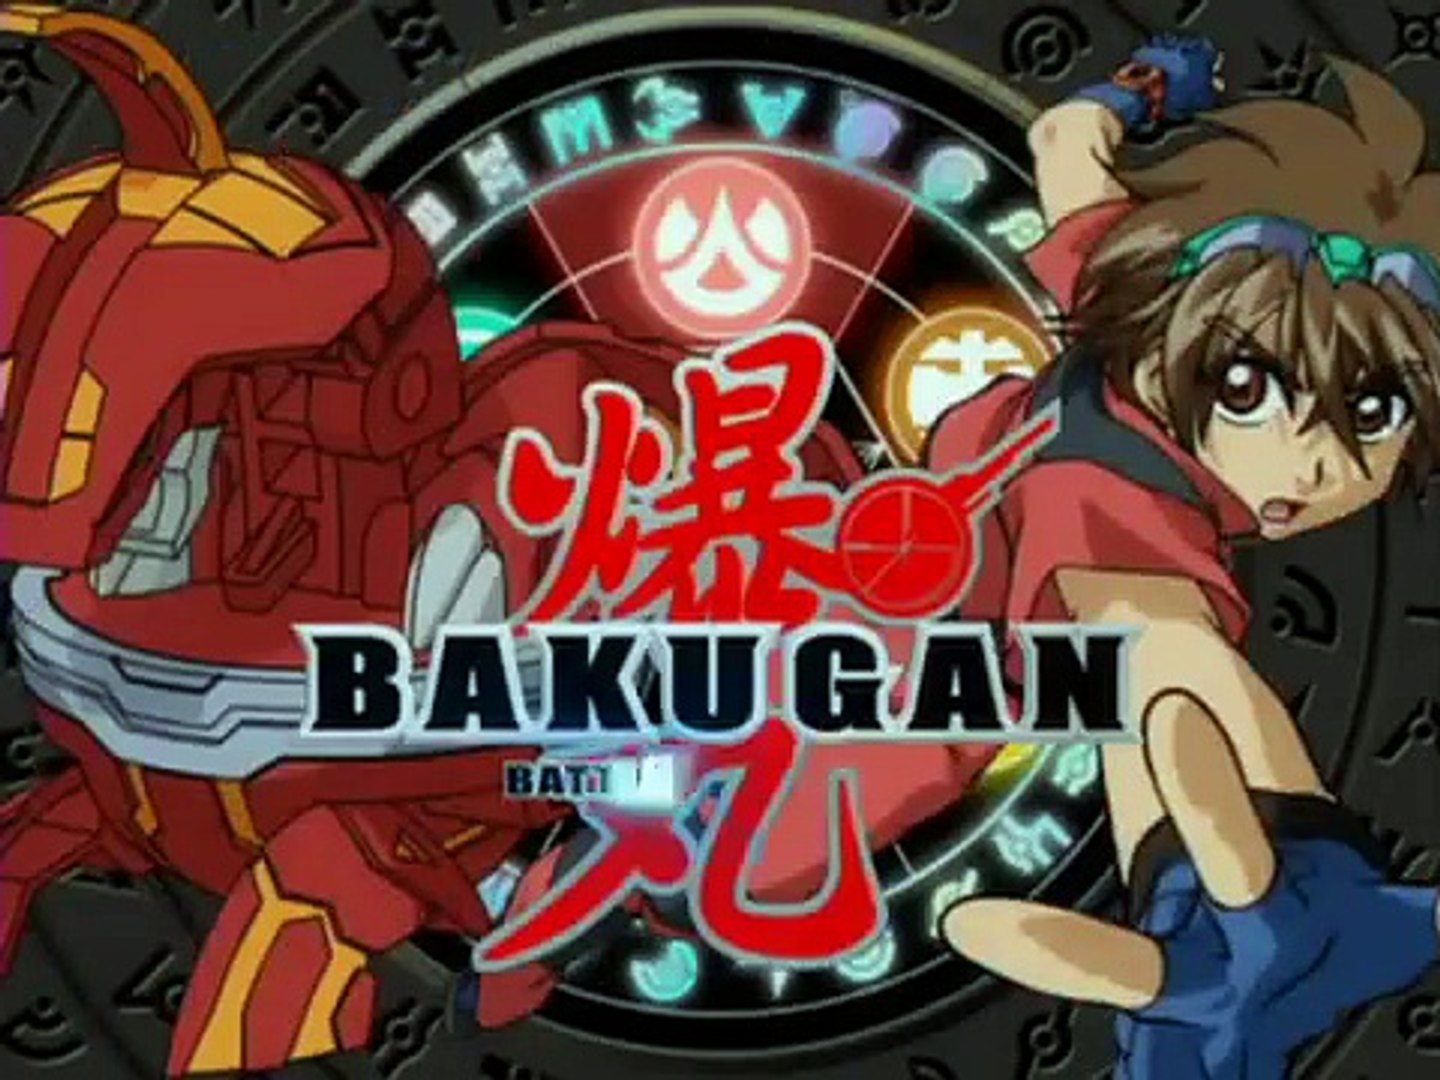 Battle Planet vs Battle Brawlers! I didn't quite realize how many of the  OGs got a remake in BP : r/Bakugan